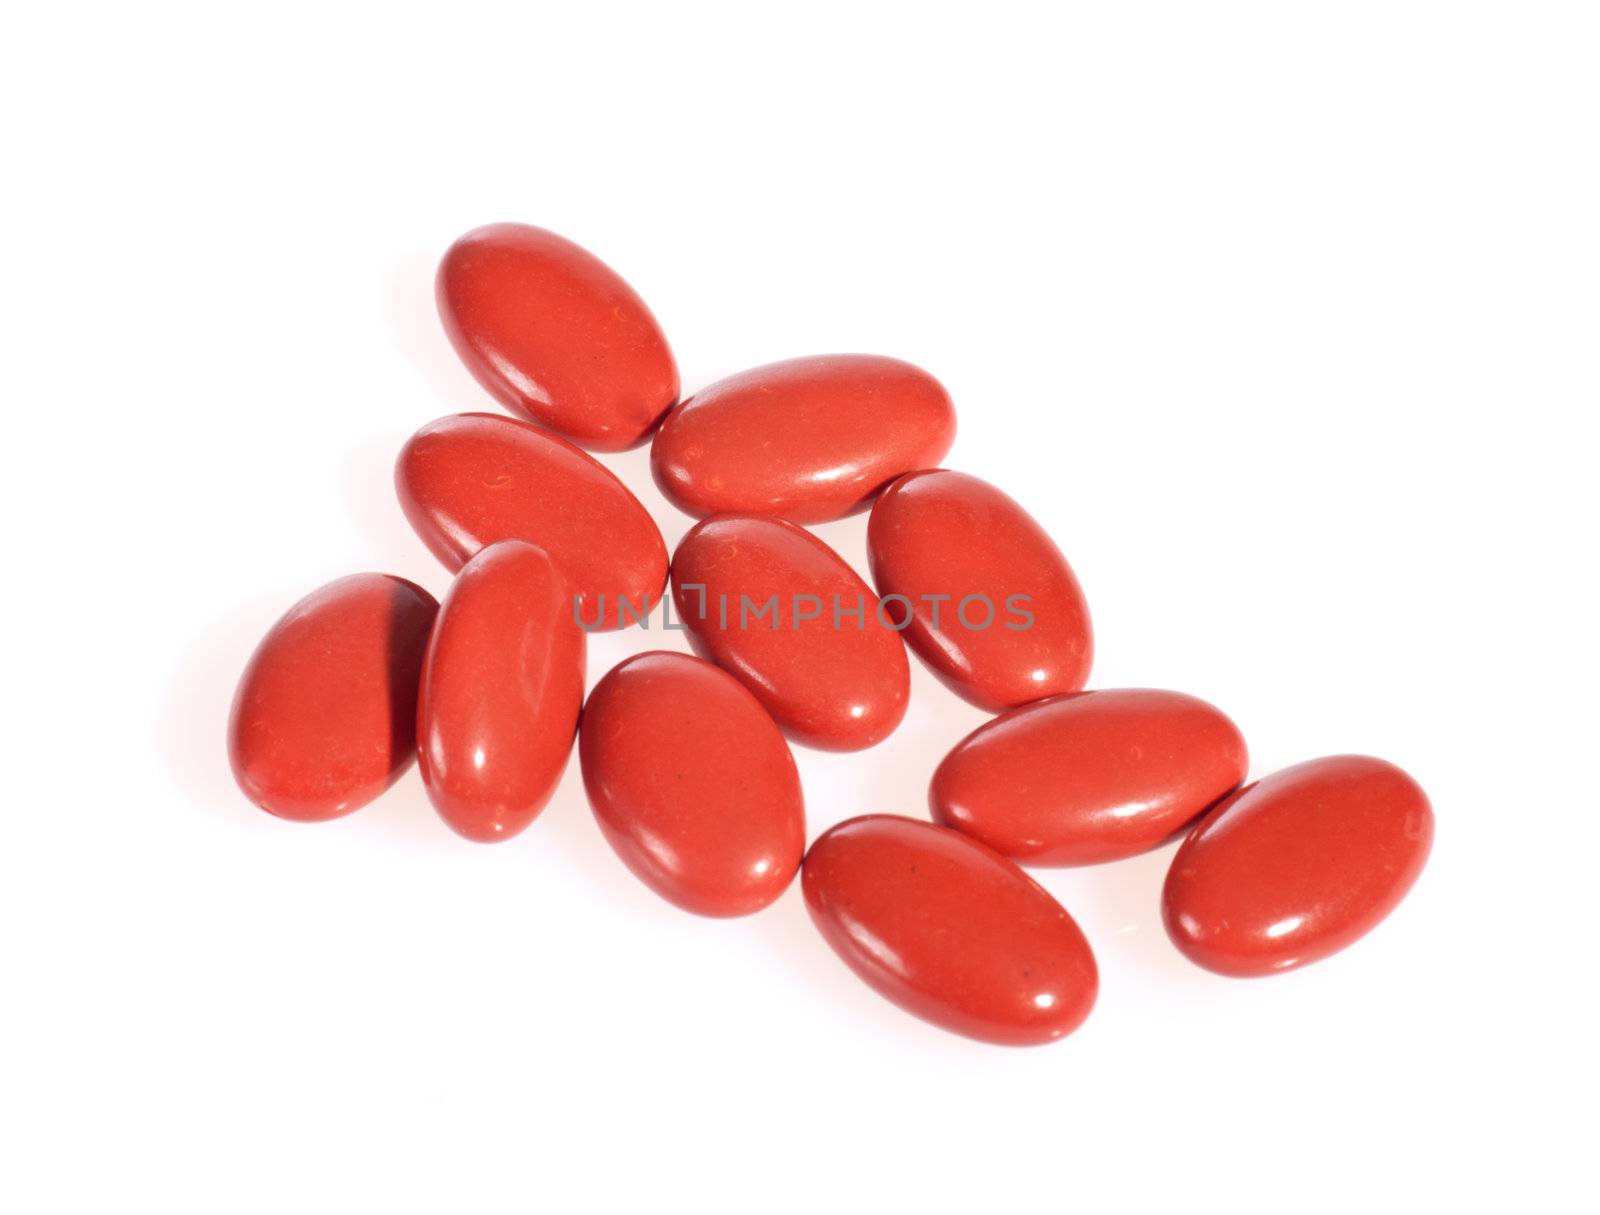 Red pills, isolated on white